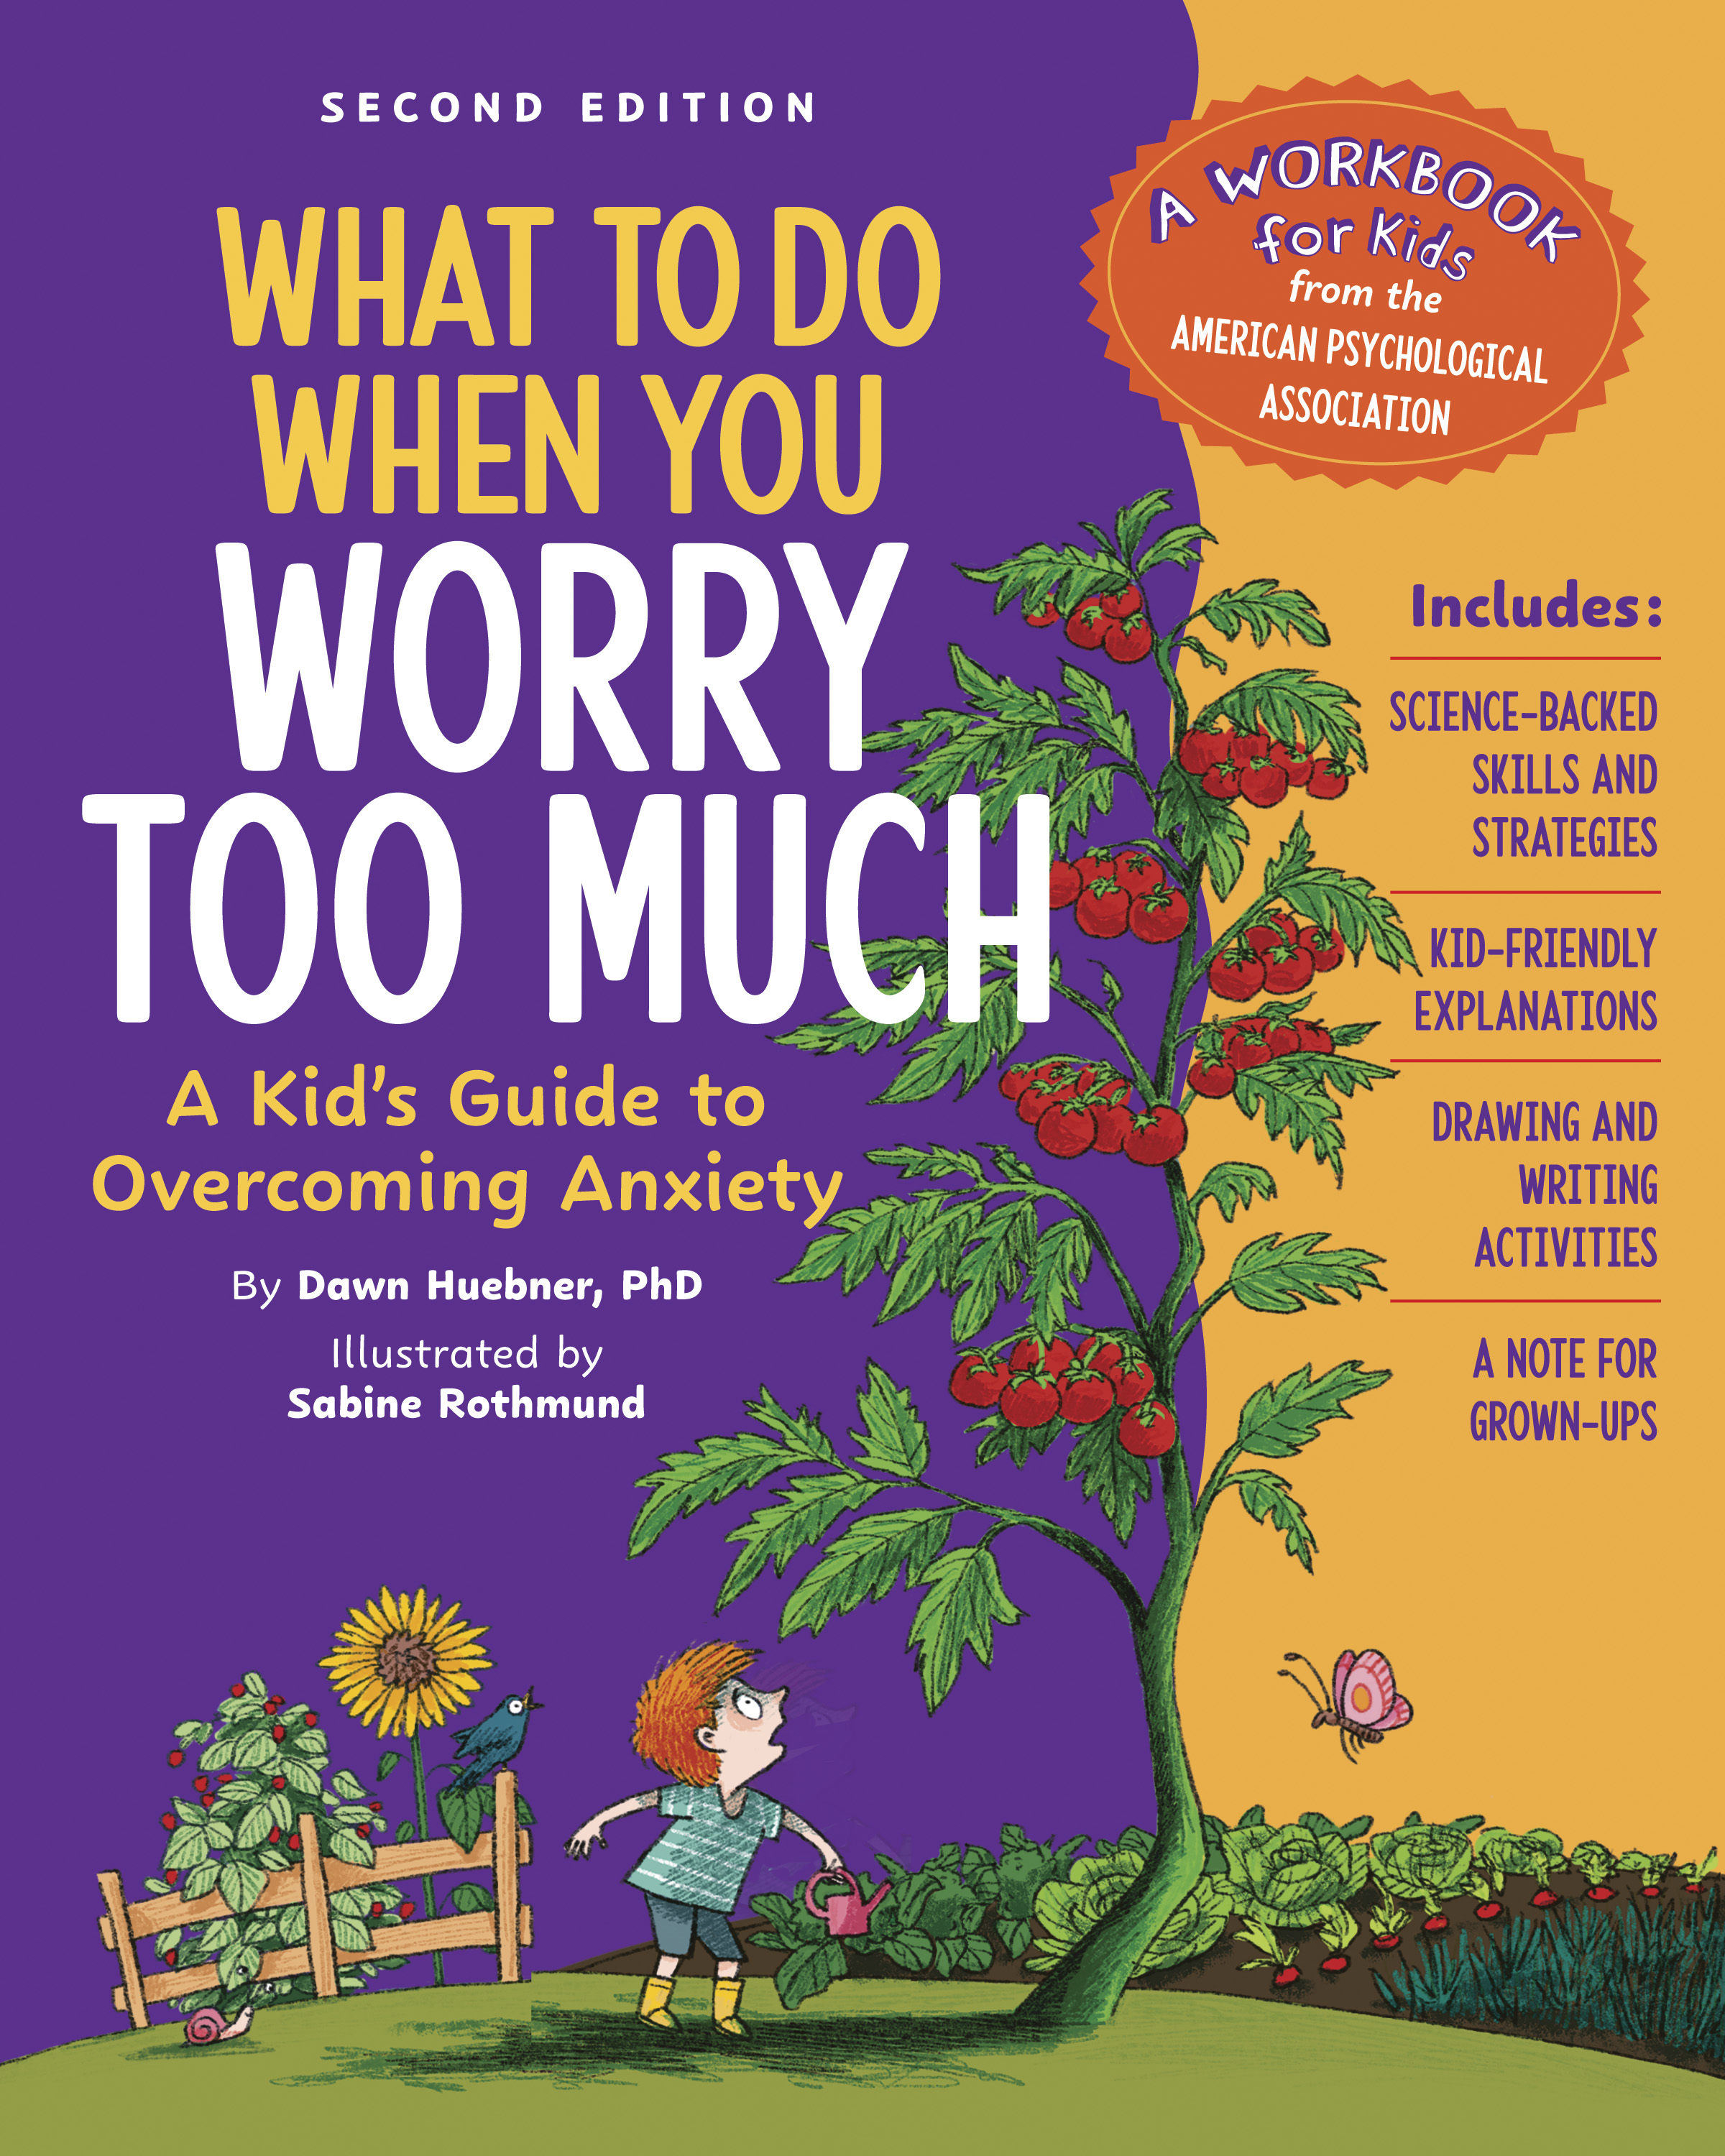 WHAT TO DO WHEN YOU WORRY TOO MUCH SECOND EDITION: A KID'S GUIDE TO OVERCOMING ANXIETY